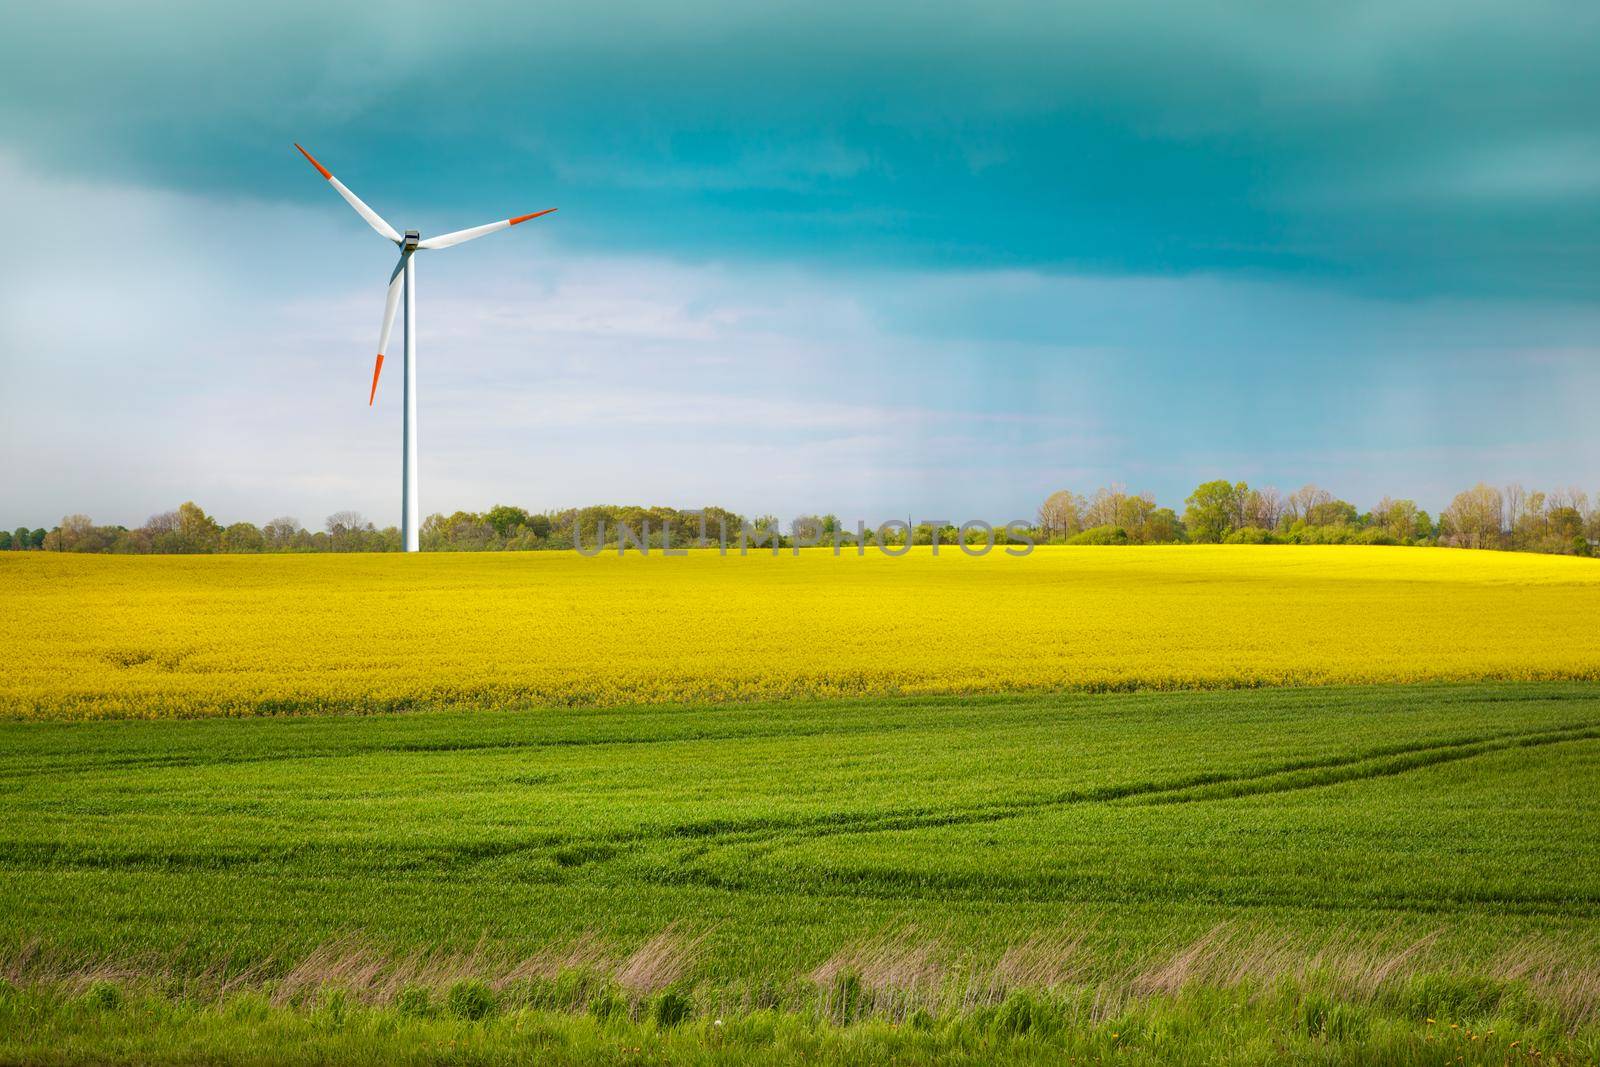 Green meadow and farmland with a wind turbine generating electricity